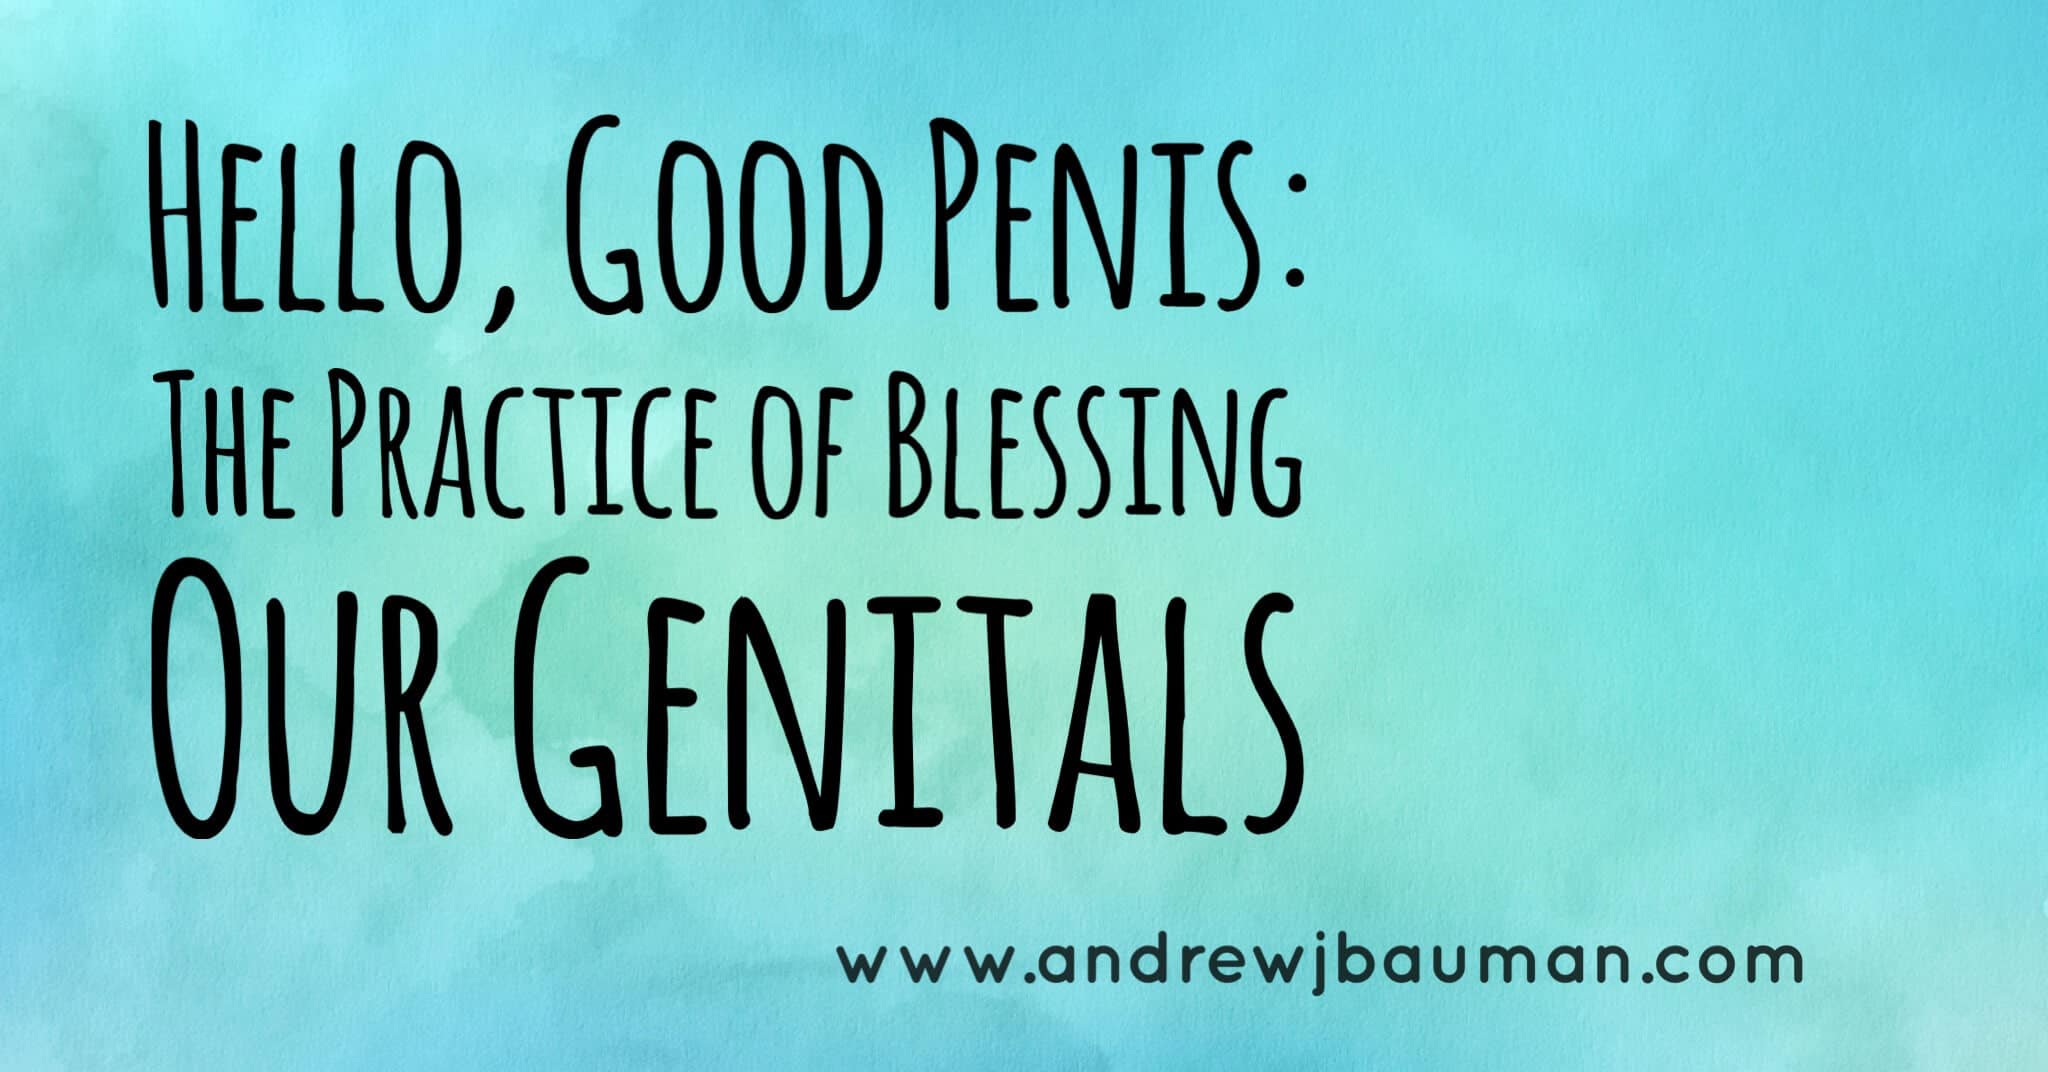 Hello, Good Penis The Practice of Blessing Our Genitals photo